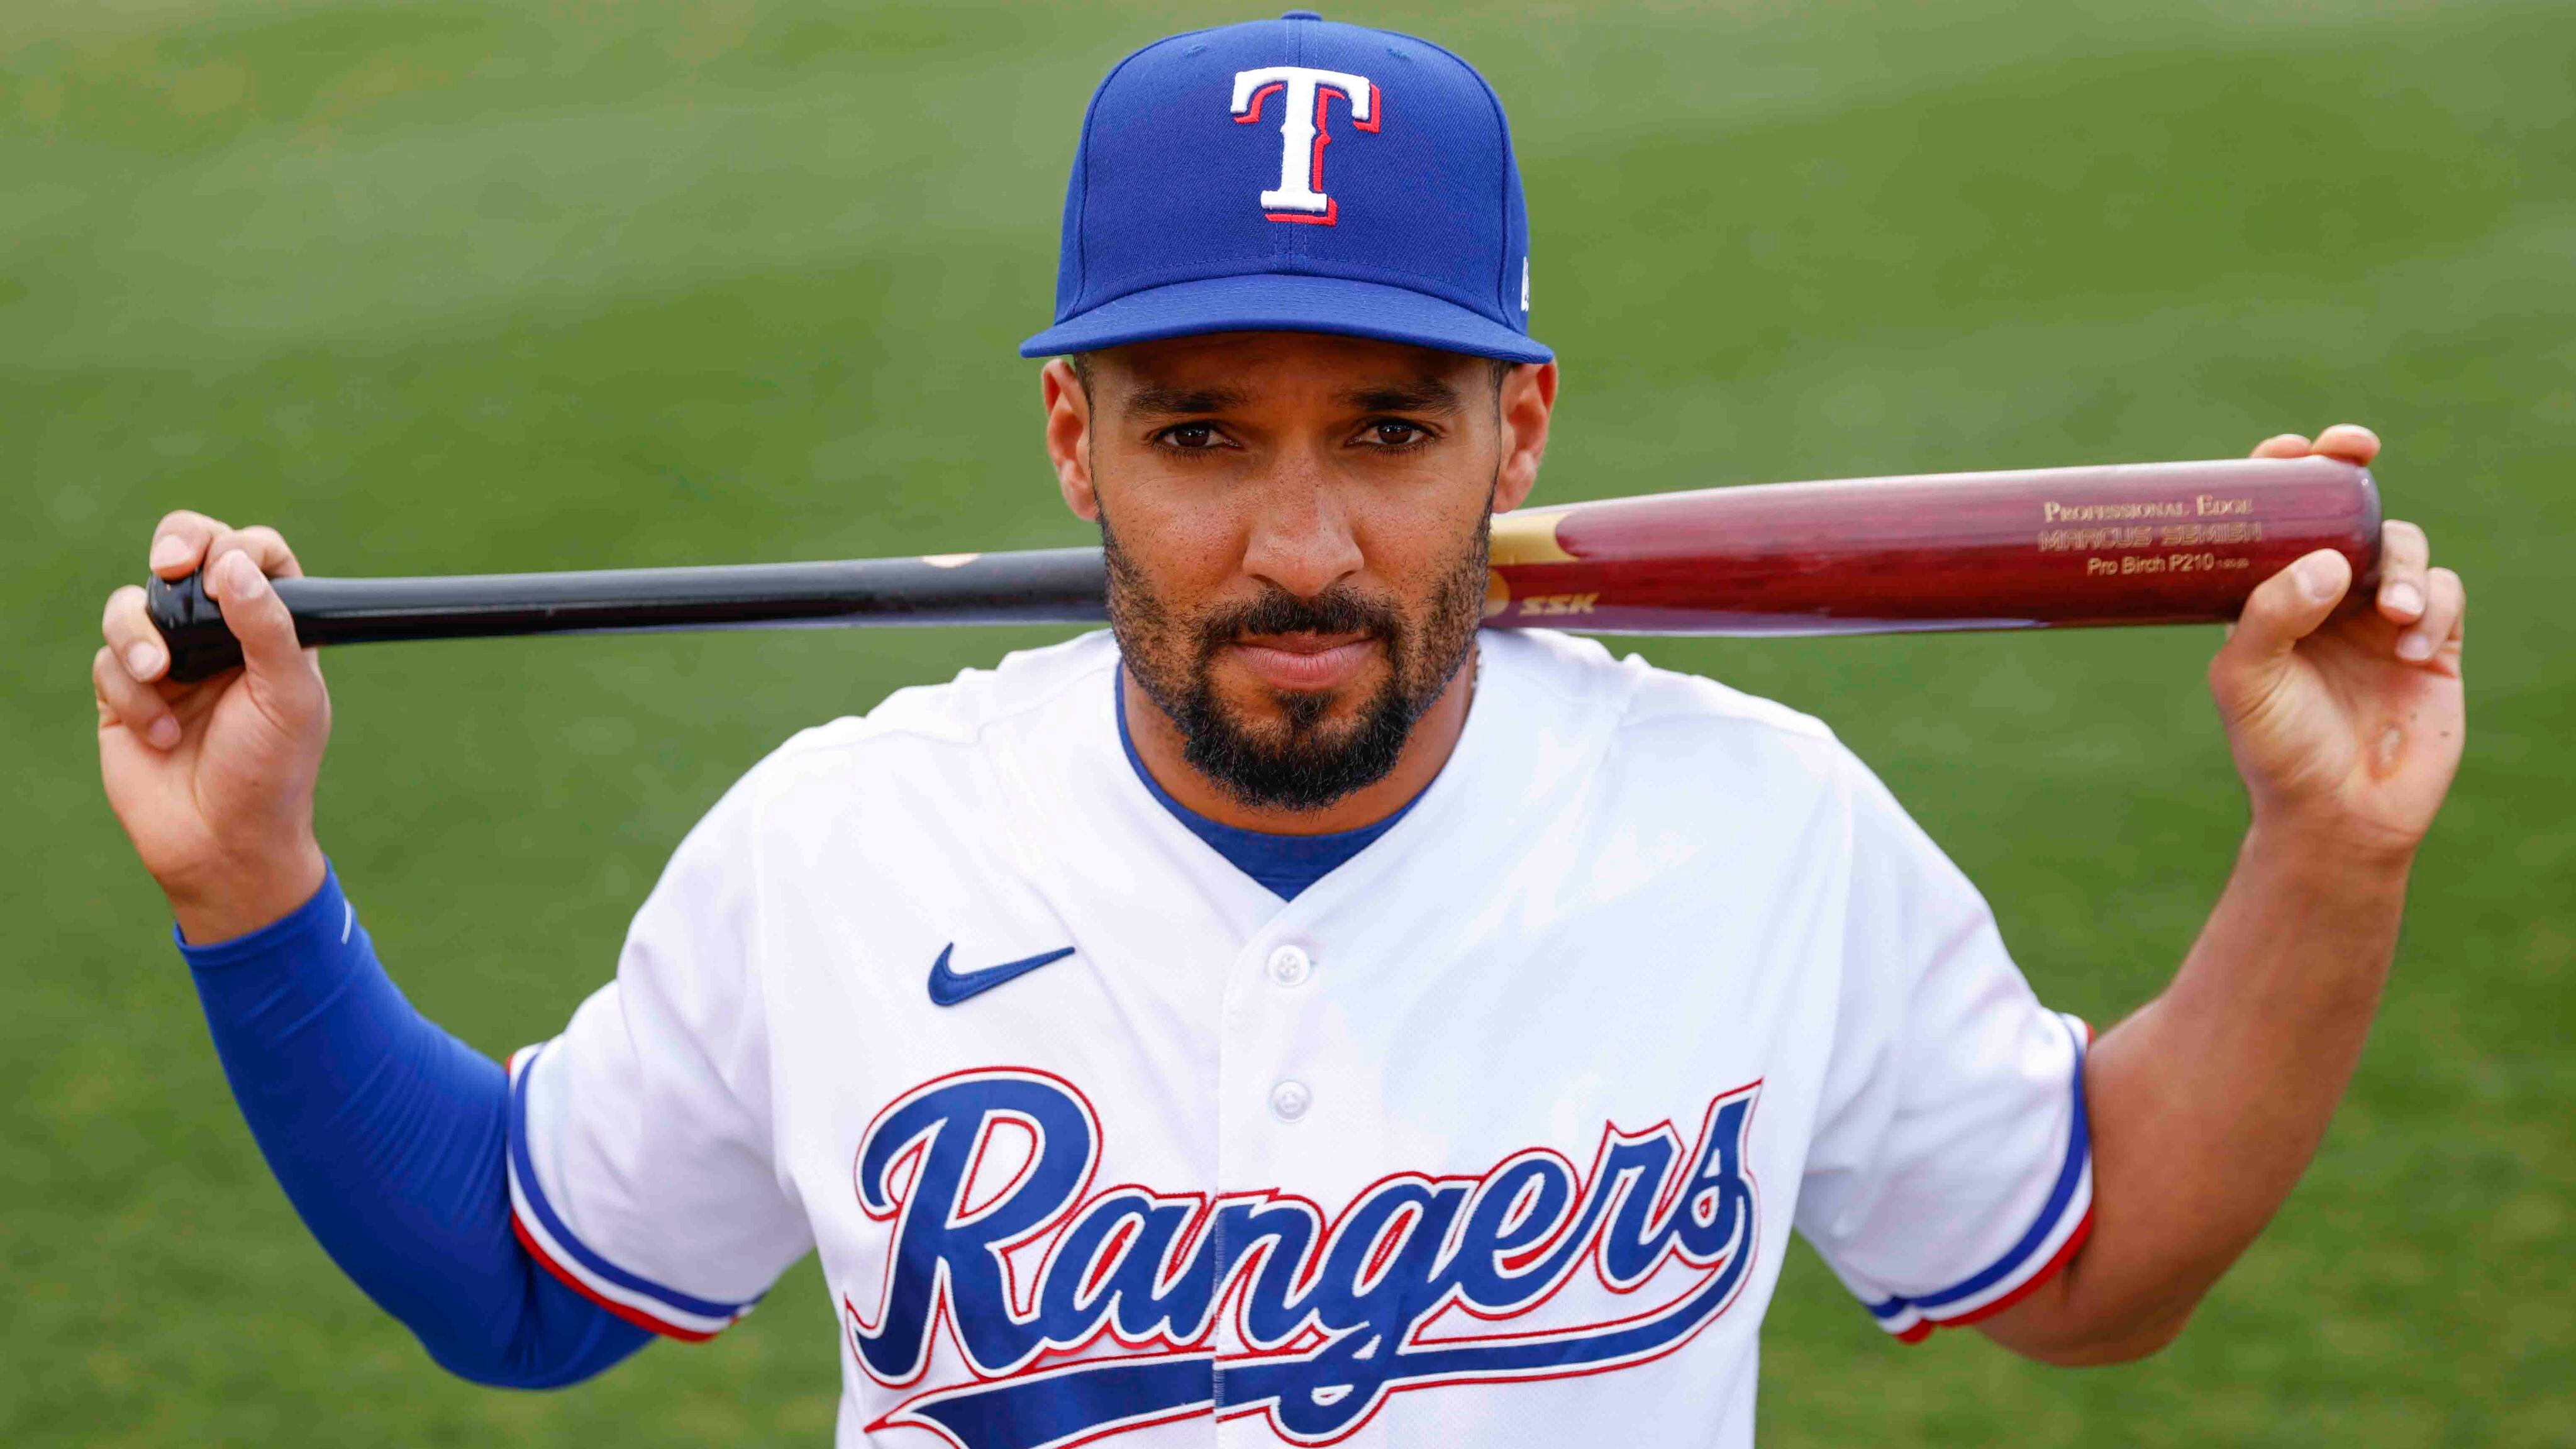 Marcus Semien's spring return to routine could be key to Rangers' 2B  starting fast in 2023